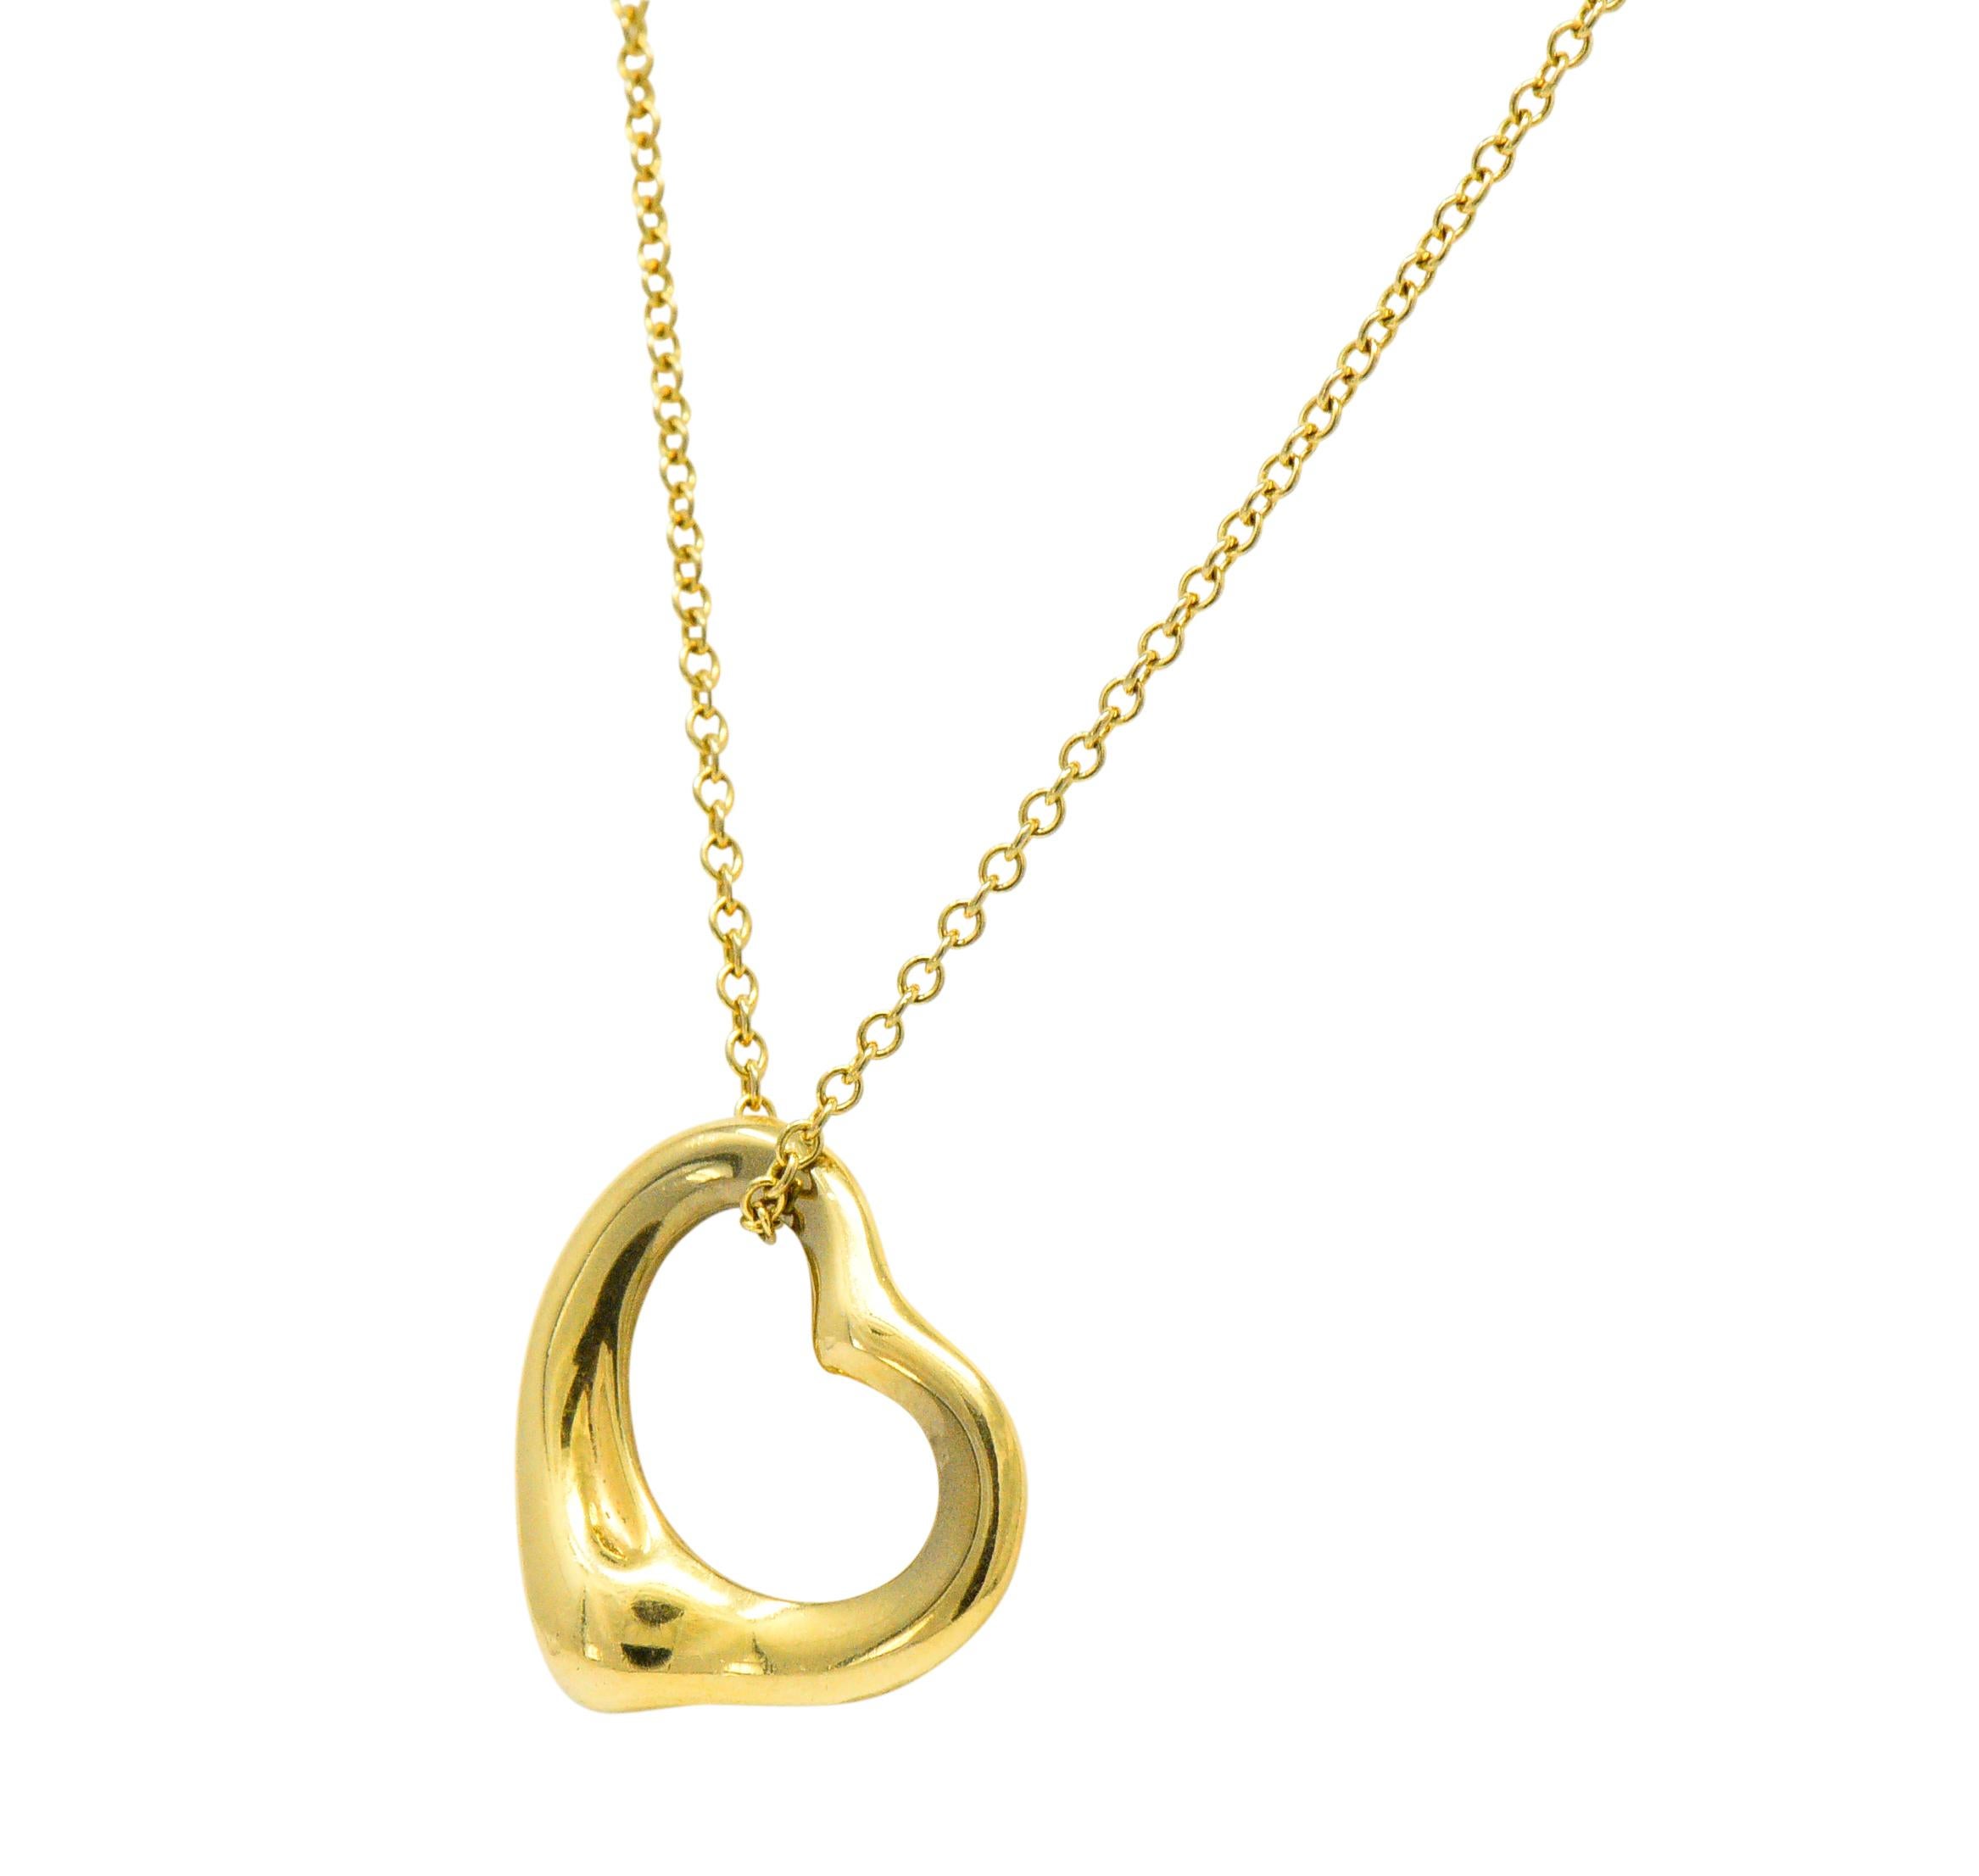 Featuring an 18k gold stylized open heart pendant 

Accompanied by a 16